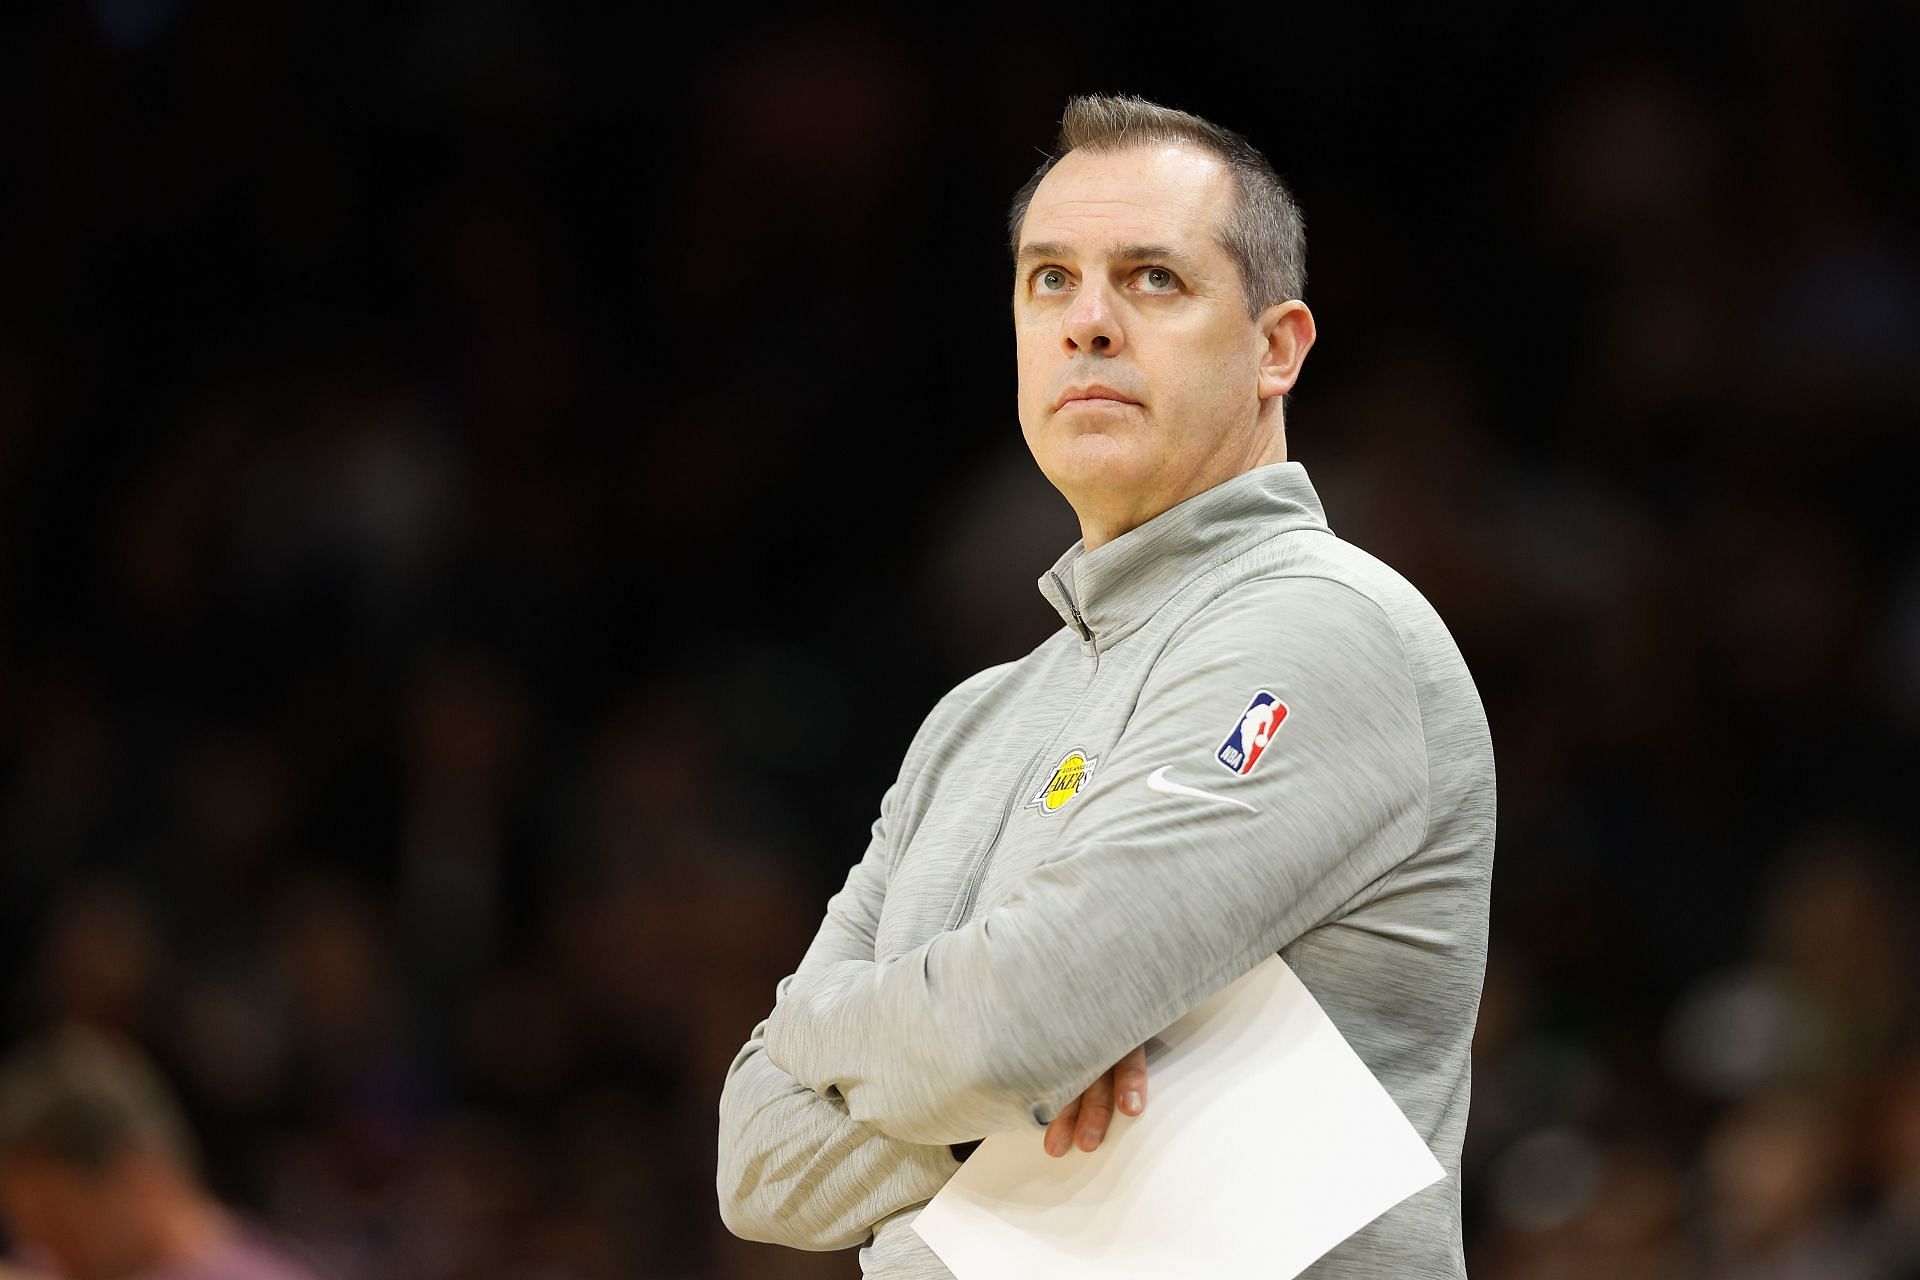 Vogel is the newest coach of the Suns (Image via Getty Images)